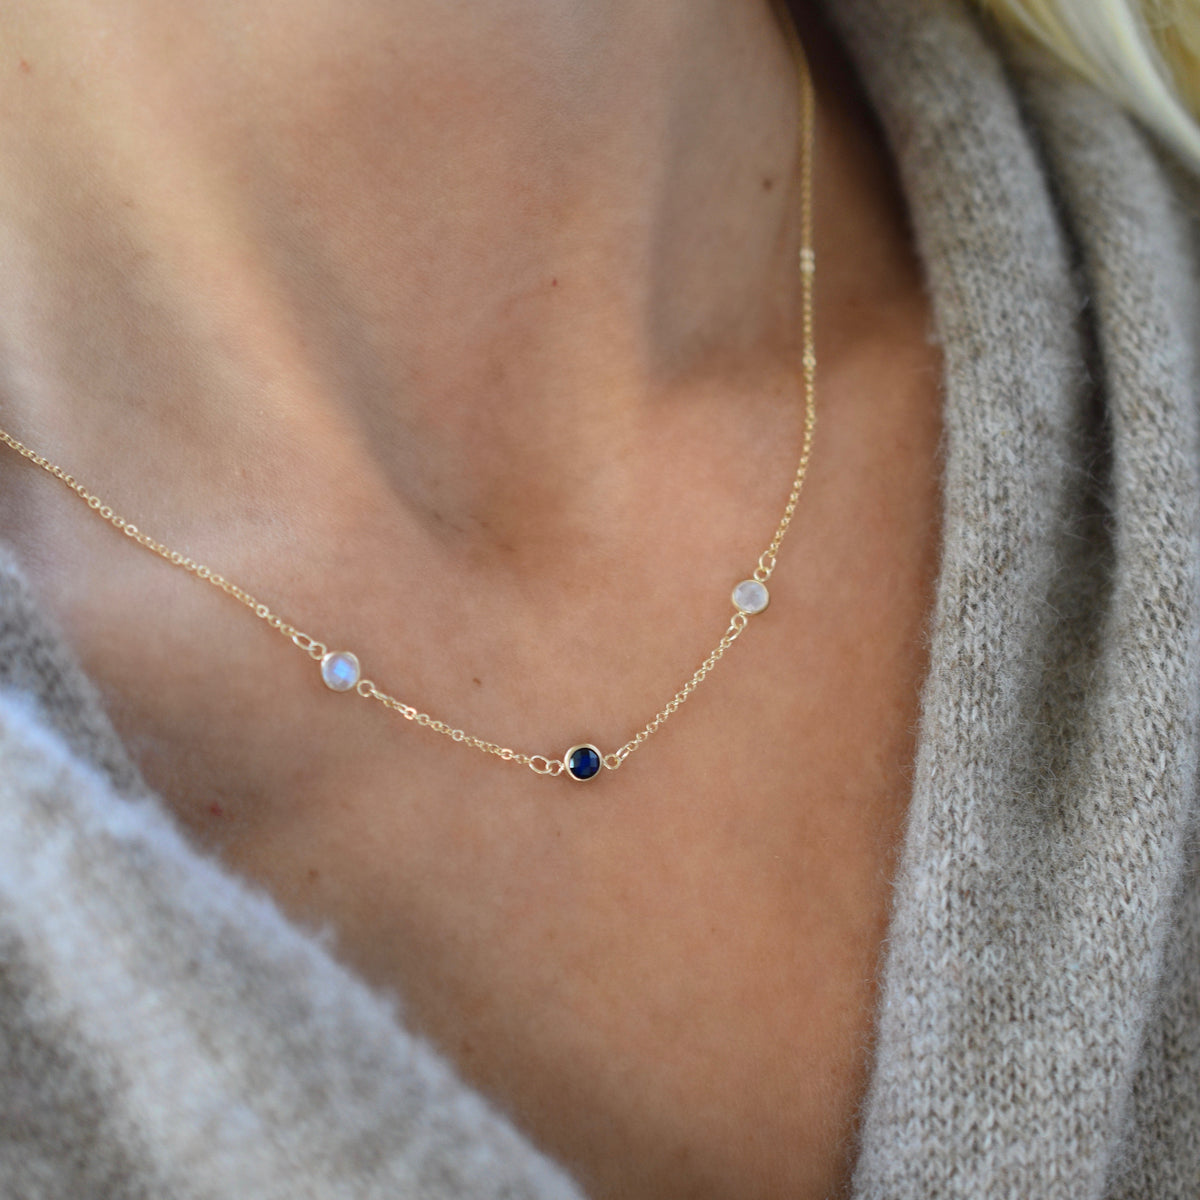 Tiny Gemstone Pendant Necklace, Simple Birthstone Necklace, Bridesmaid  Jewelry, Gift for Her, Minimalist Necklace, Delicate Stone, NK-BZ - Etsy